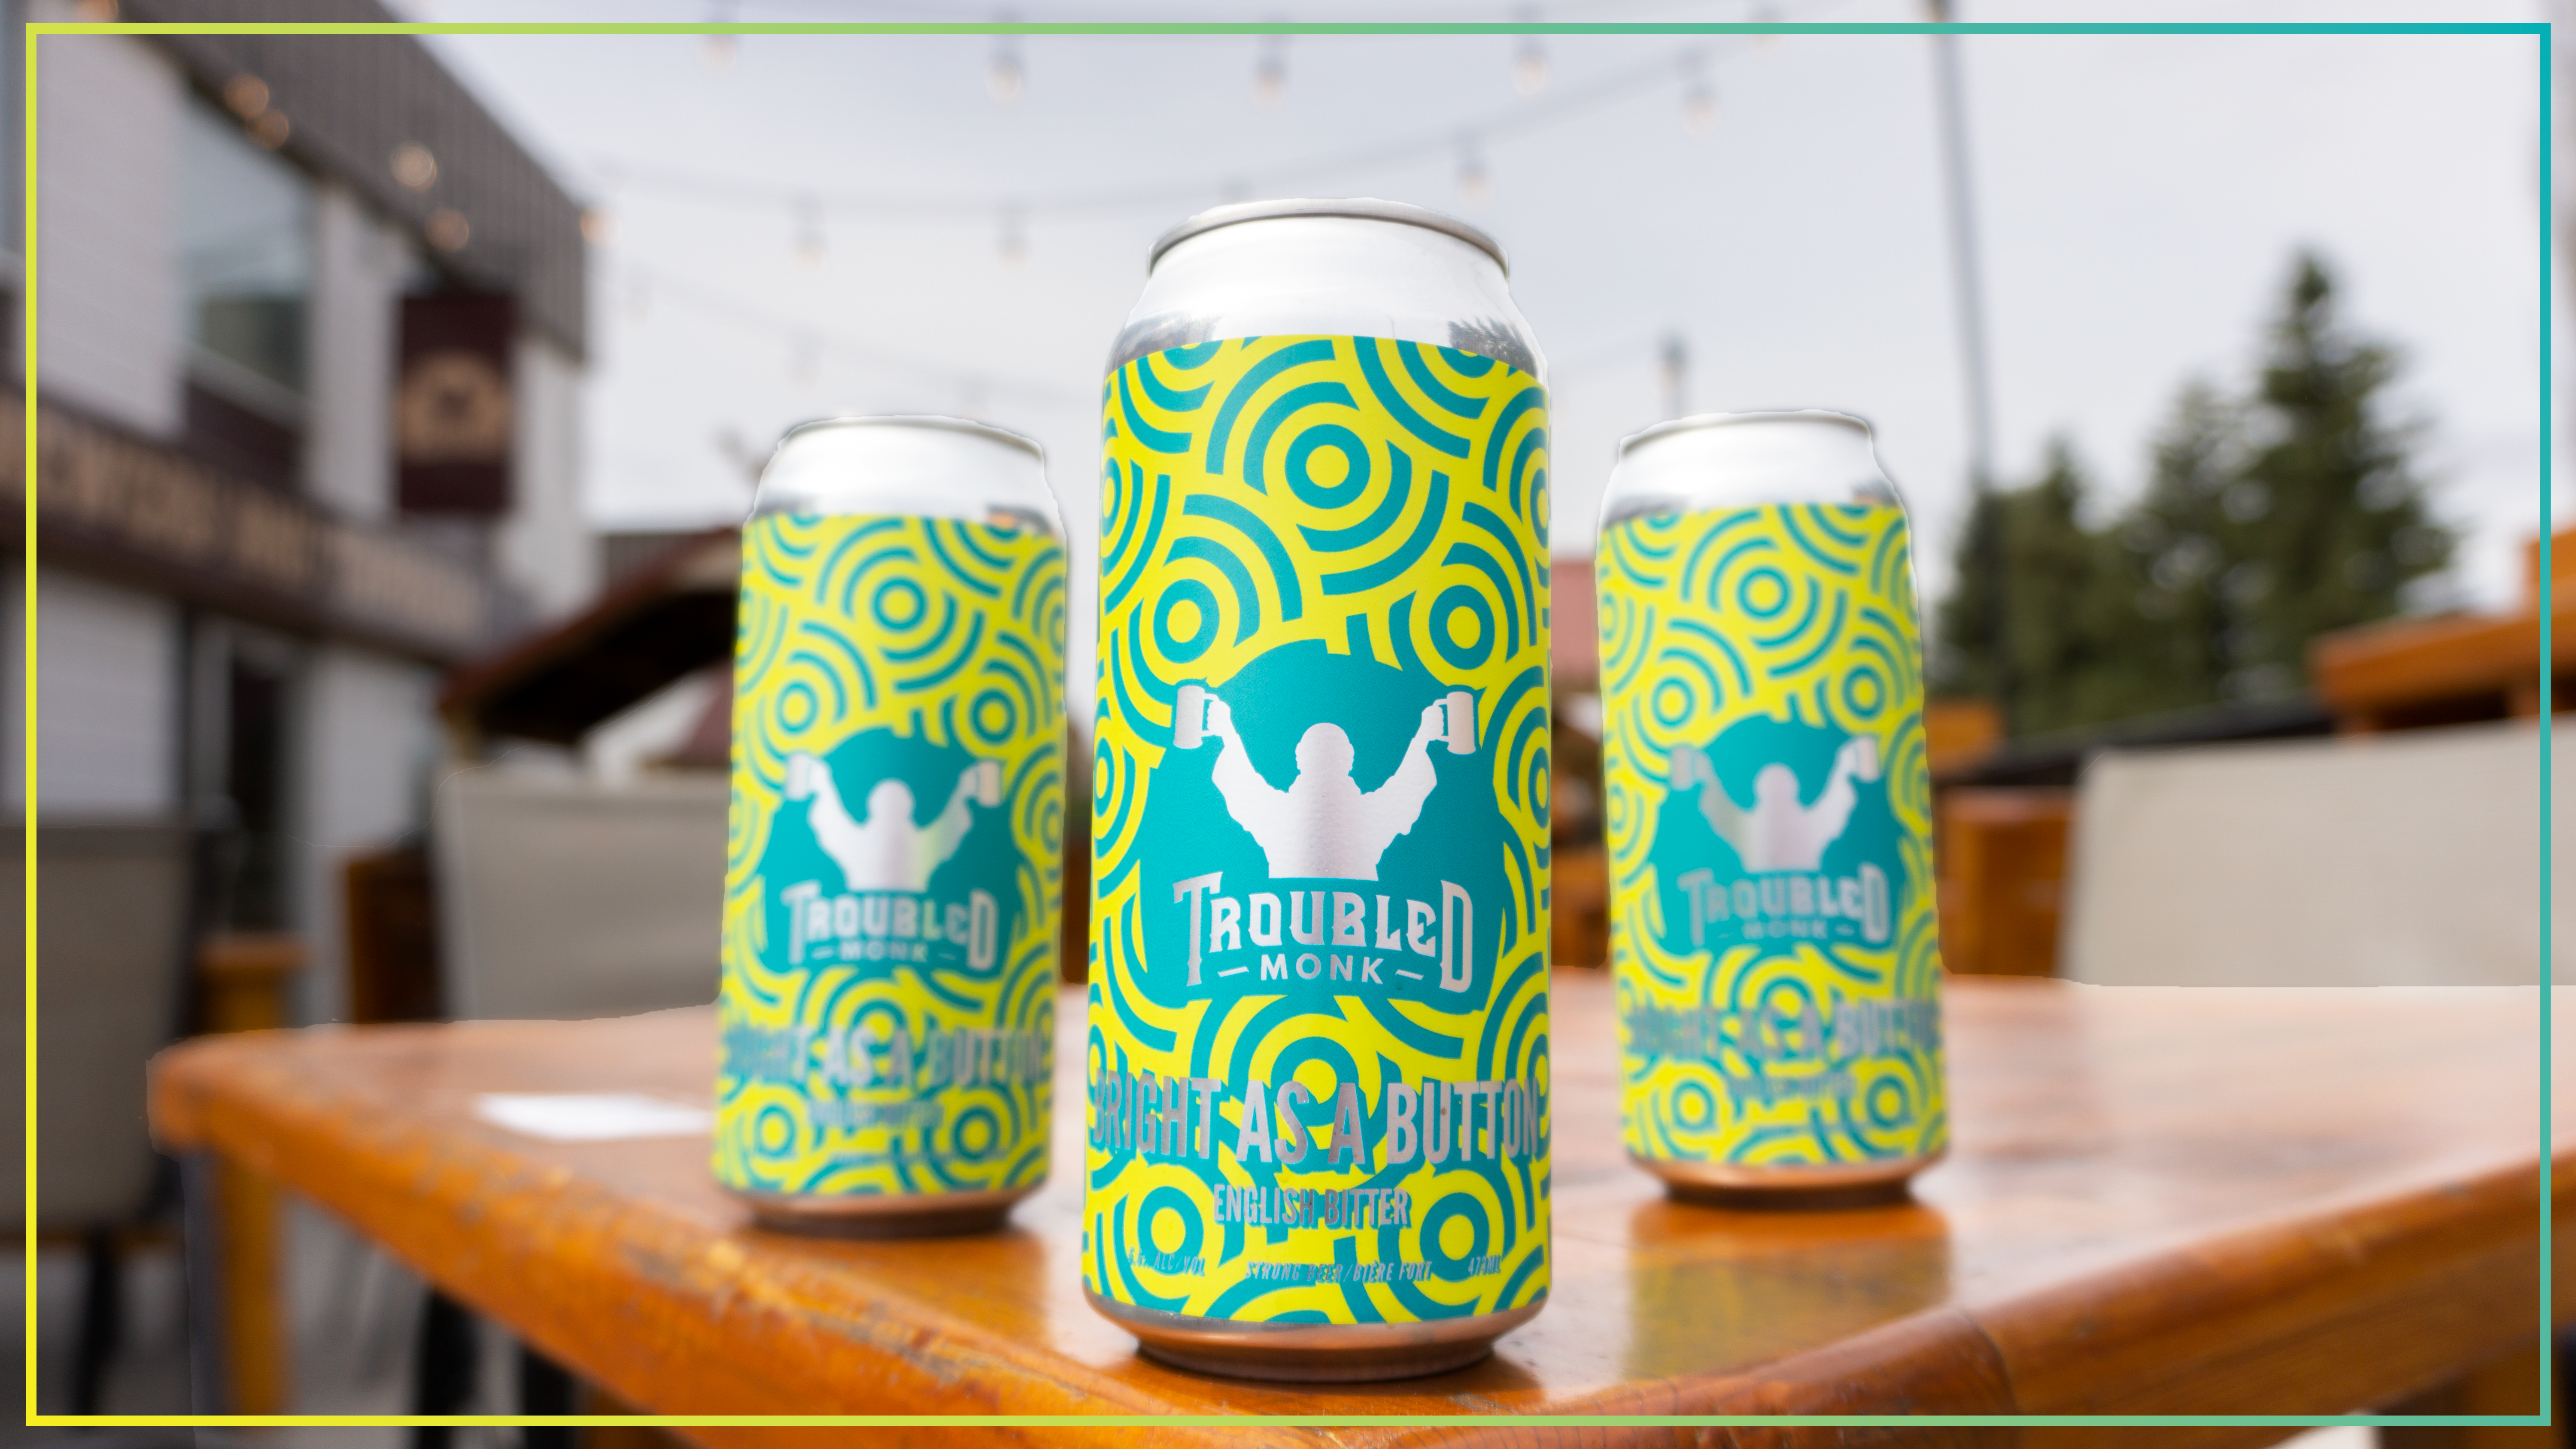 three cans of troubled monk bright as a button english bitter sitting on a wood patio table outside of the taproom.